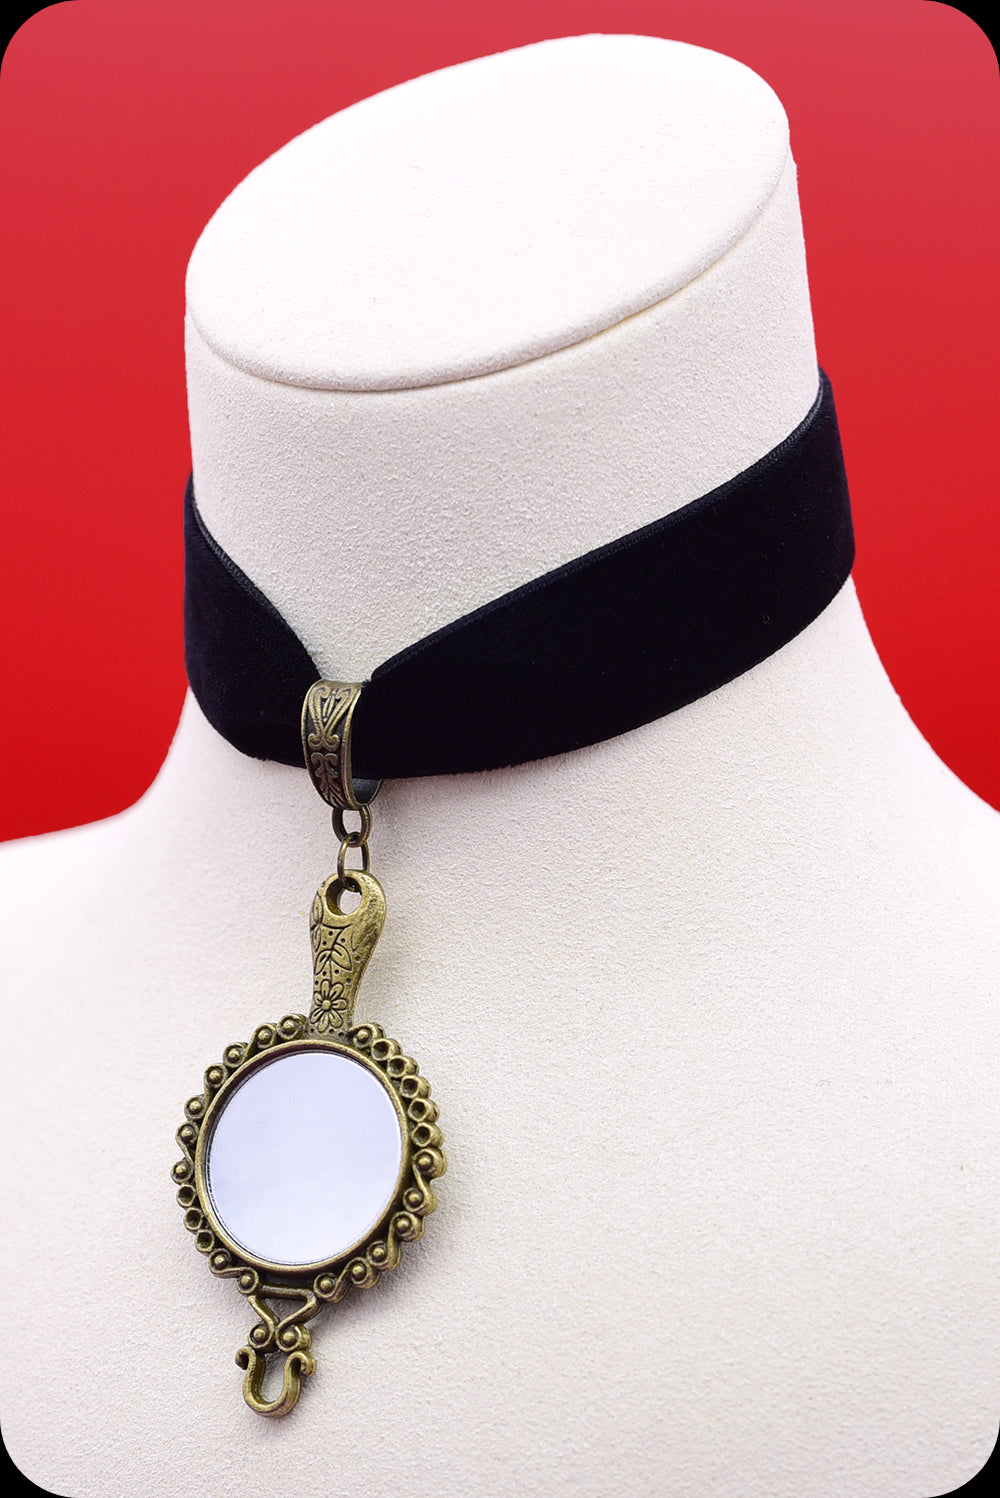 A black velvet antique brass looking glass choker necklace by Scorpio Rising